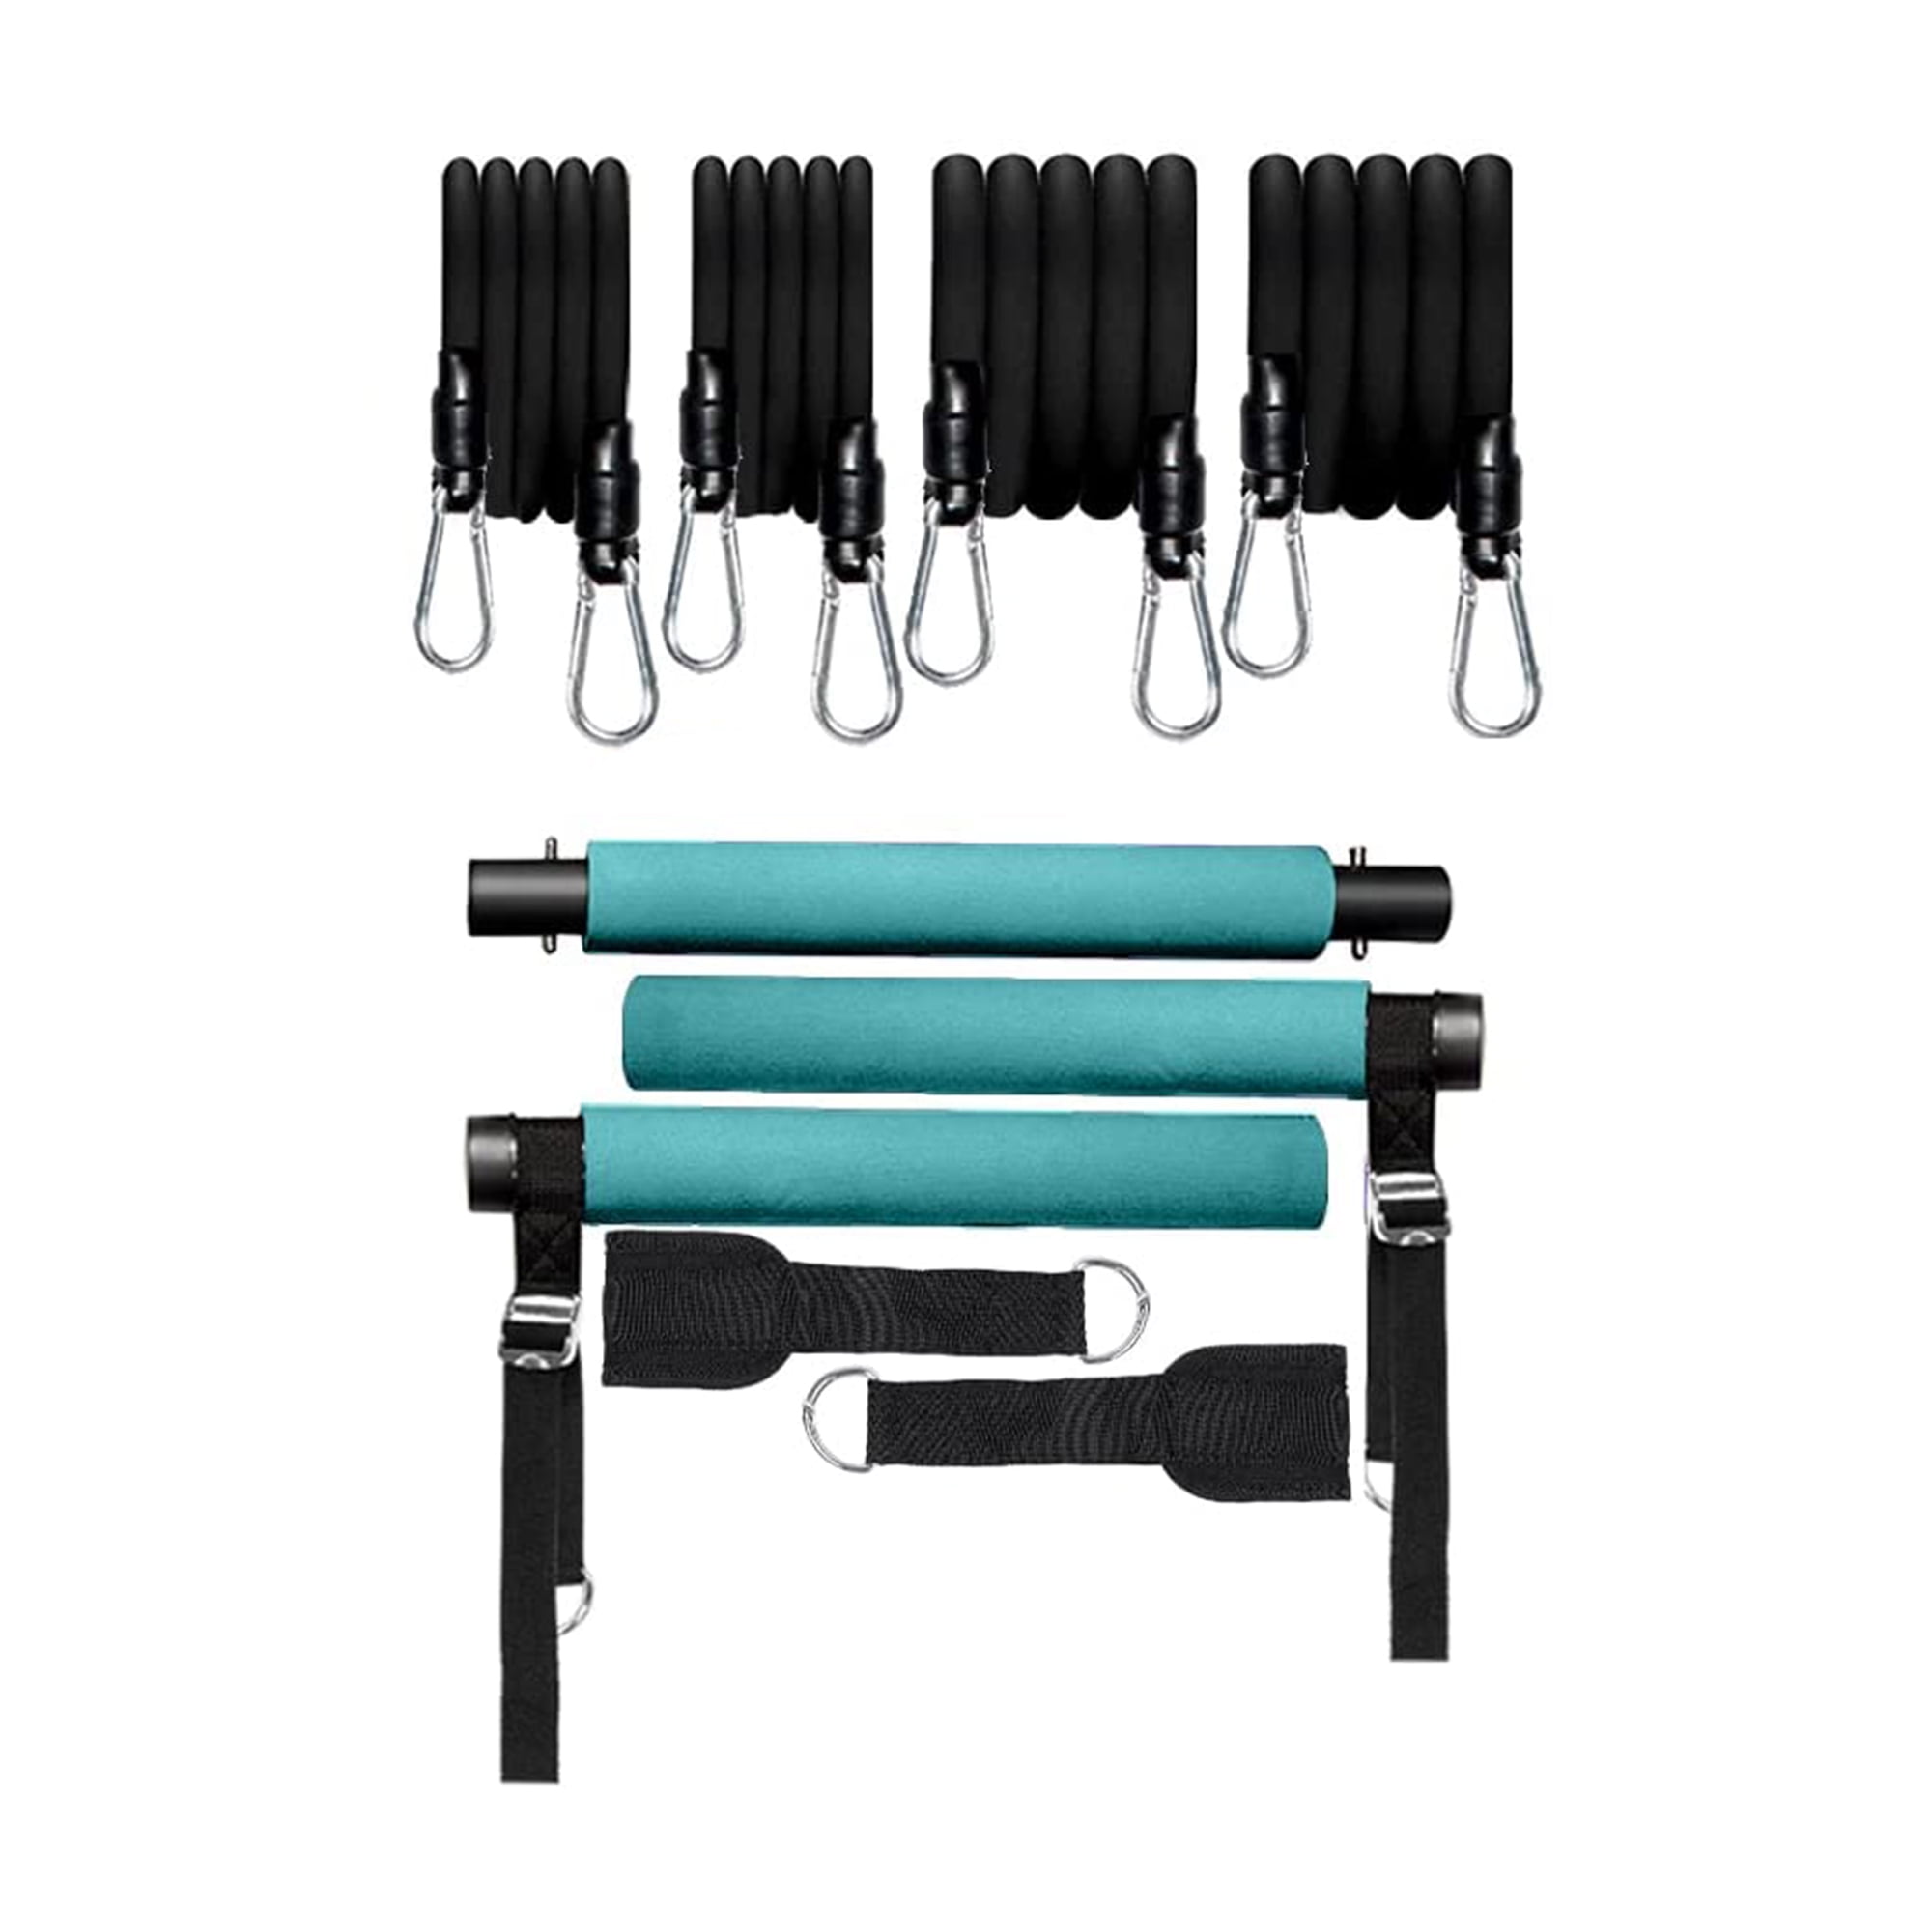 MALOOW Pilates Bar with Adjustable Resistance Bands and Travel Bag